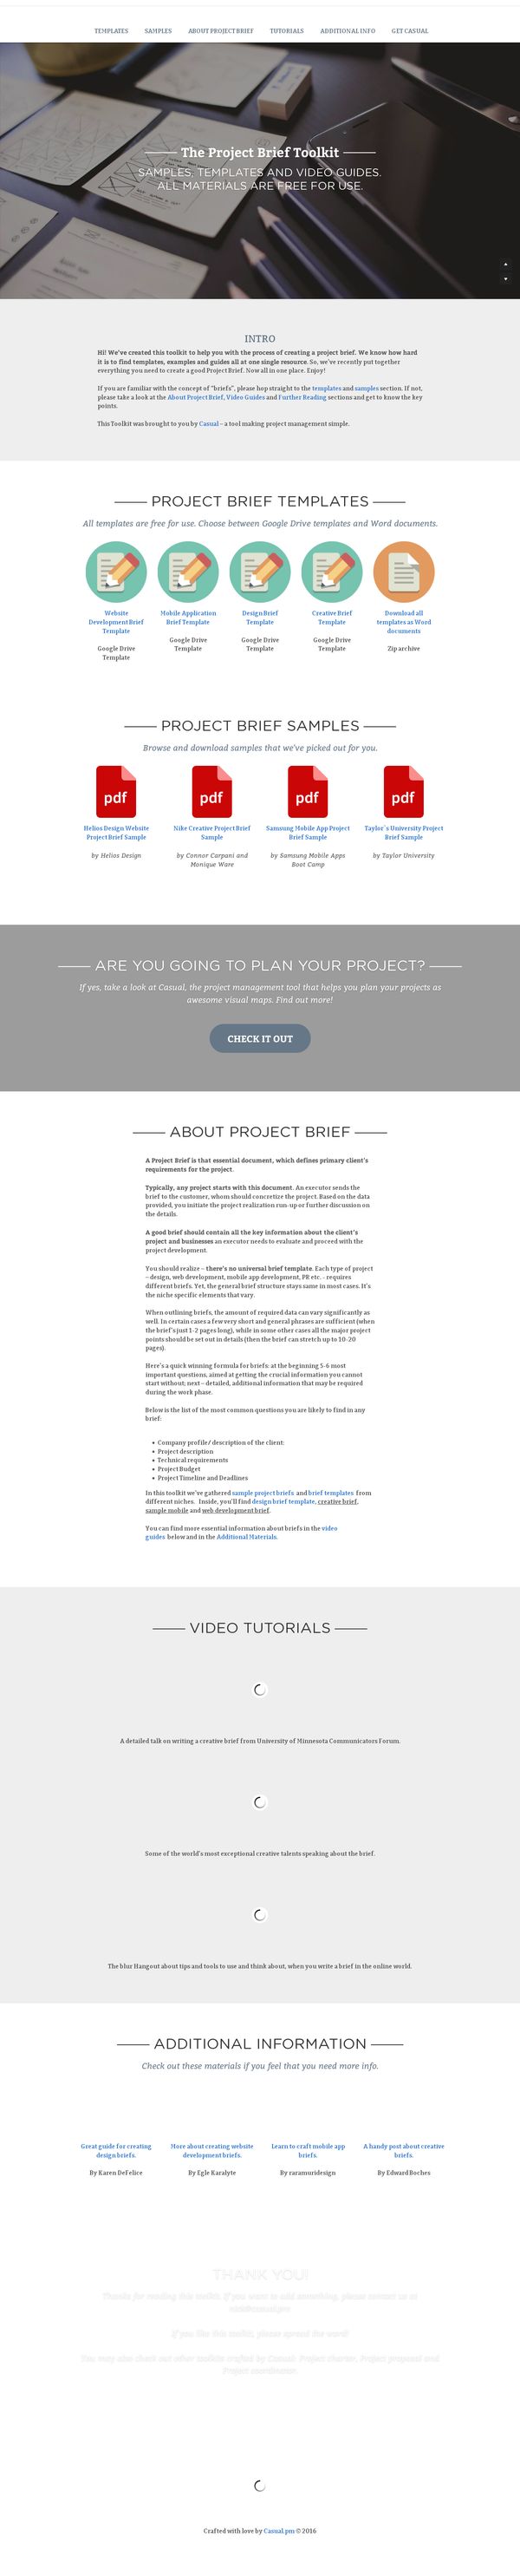 Projects Brief Templates